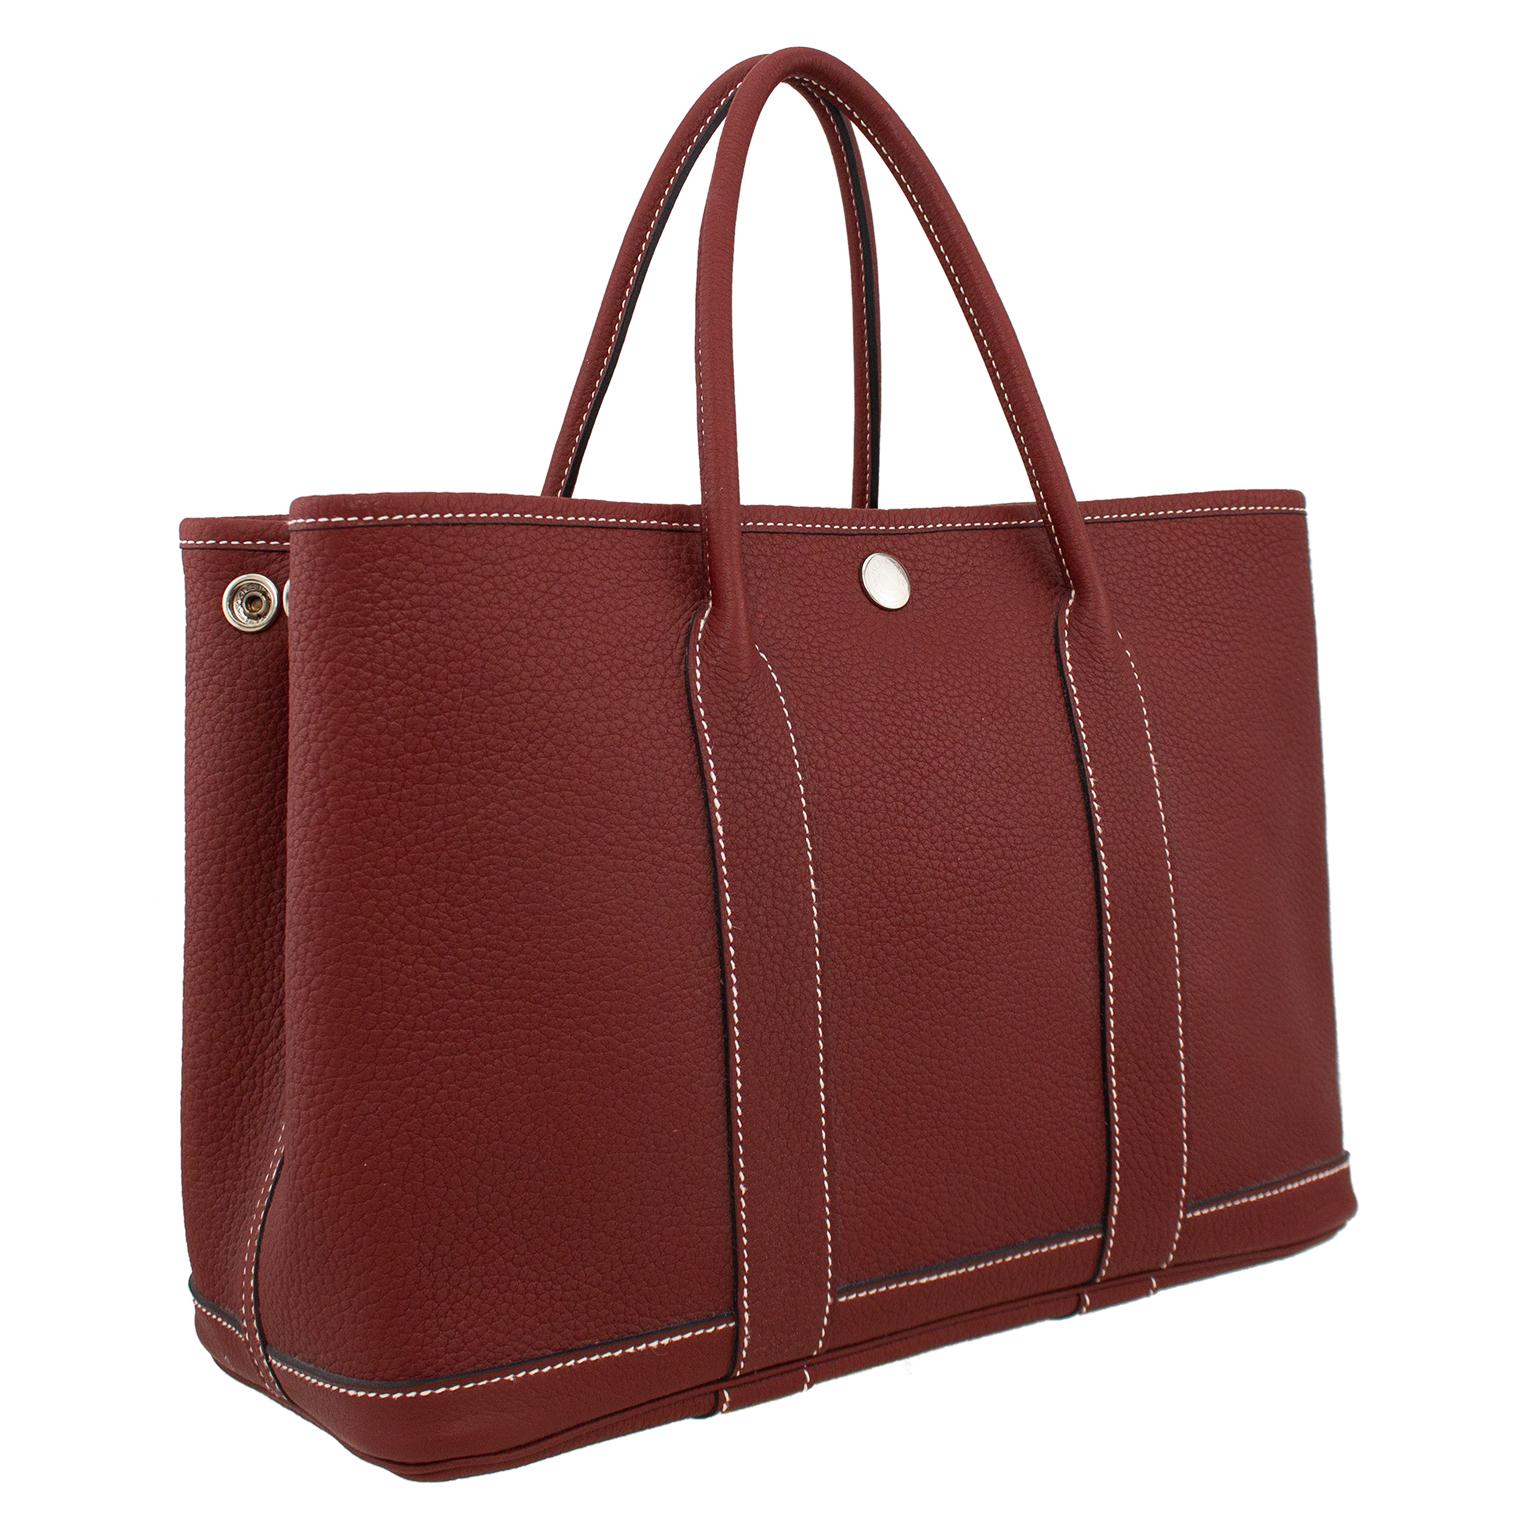 Released in 1964, the Garden Party bag is Hermès' take on the practical tote bag. Handmade from rouge Negonda leather, this piece is a fine example of the brand's minimalistic yet exceptional craftsmanship. This elegant bag also features two rolled